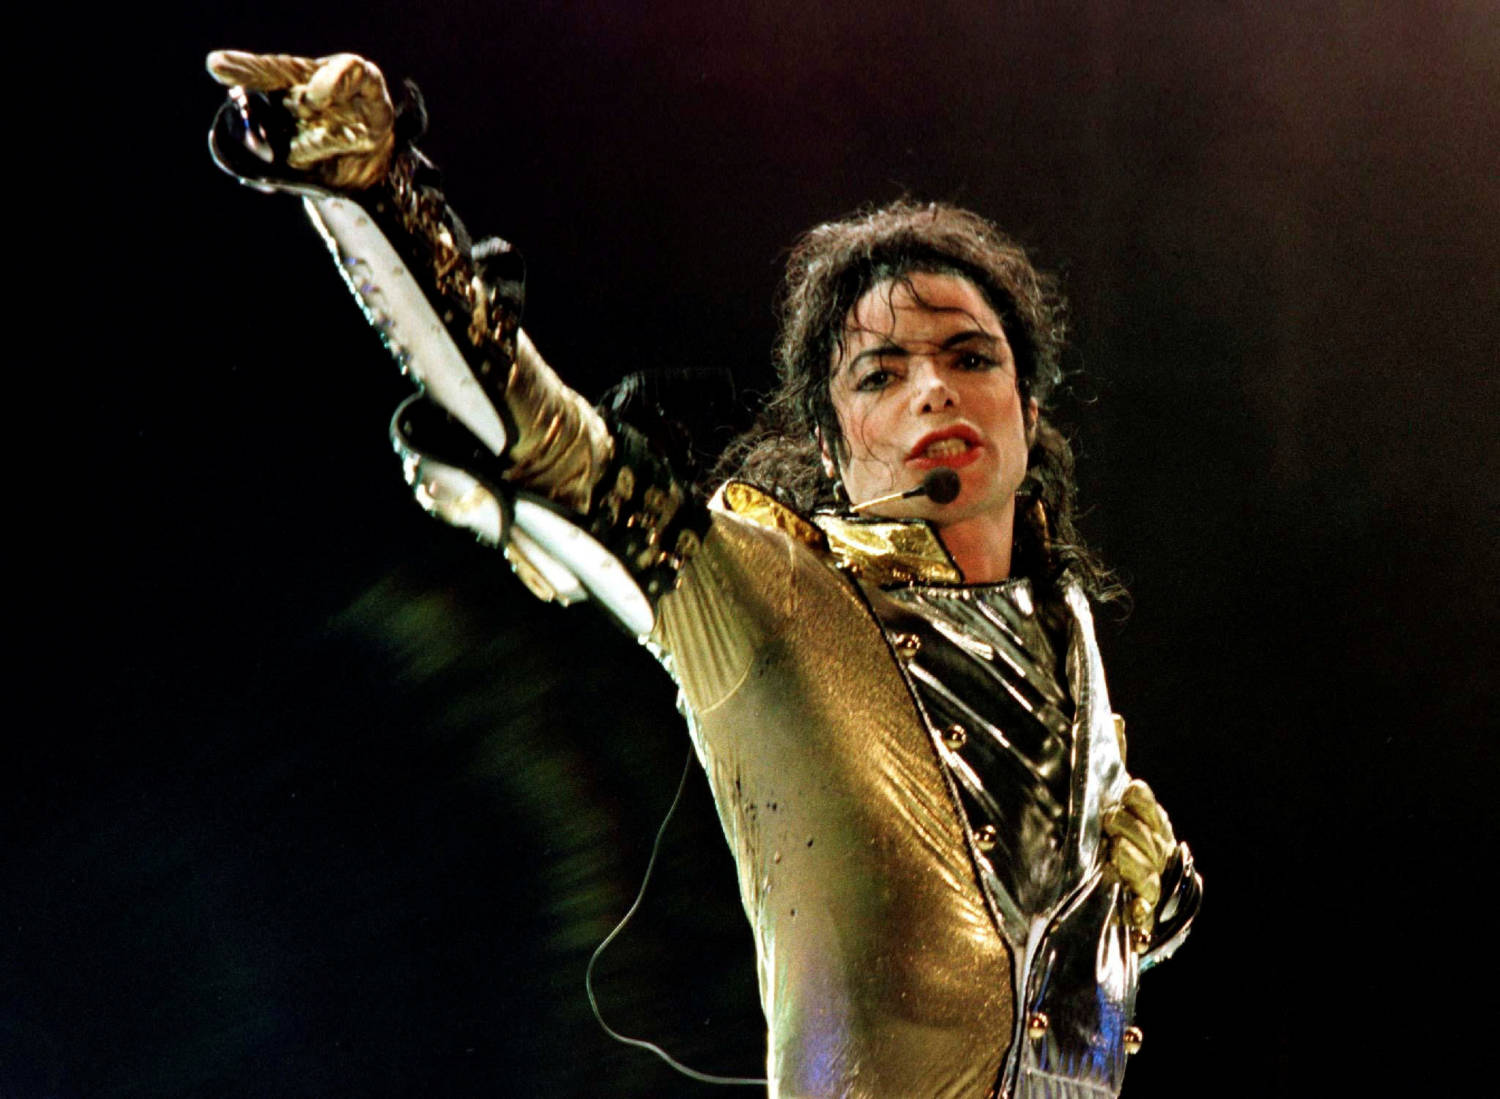 File Photo: File Photo Of U.s. Pop Star Michael Jackson Performing During His Concert In Vienna